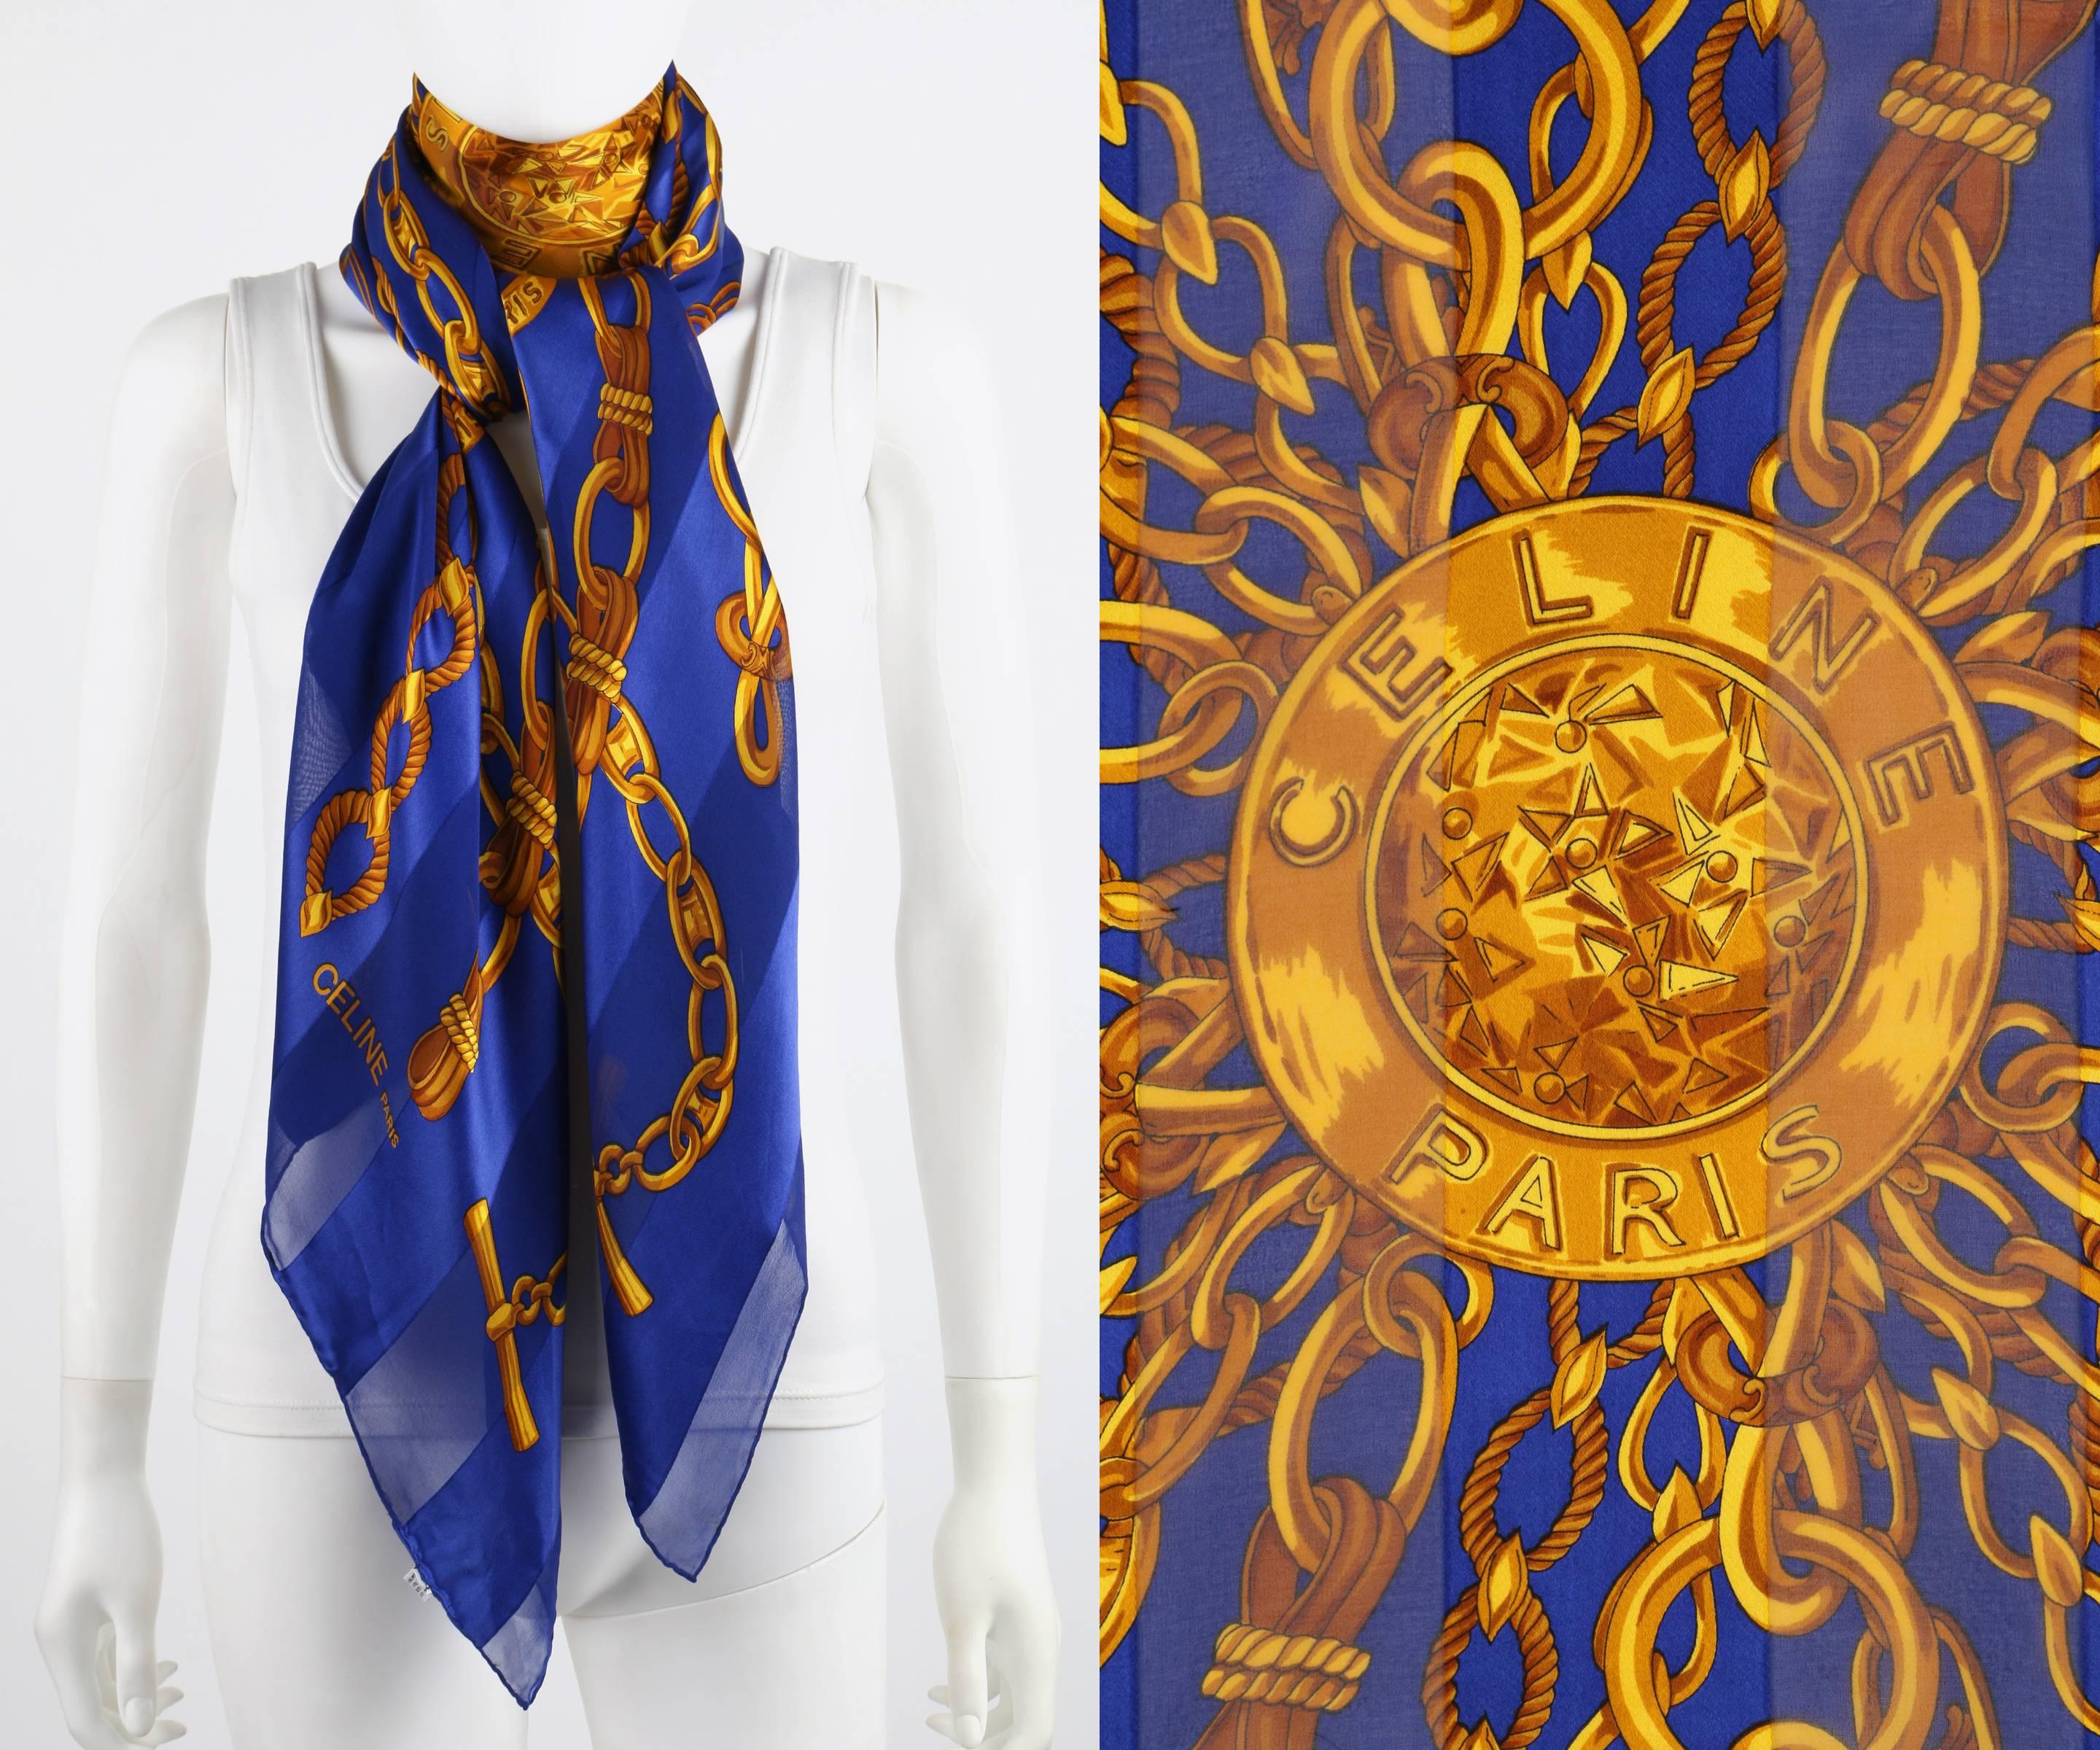 Celine 100% Silk scarf. Blue opaque and translucent striped background. Center gold medallion with 